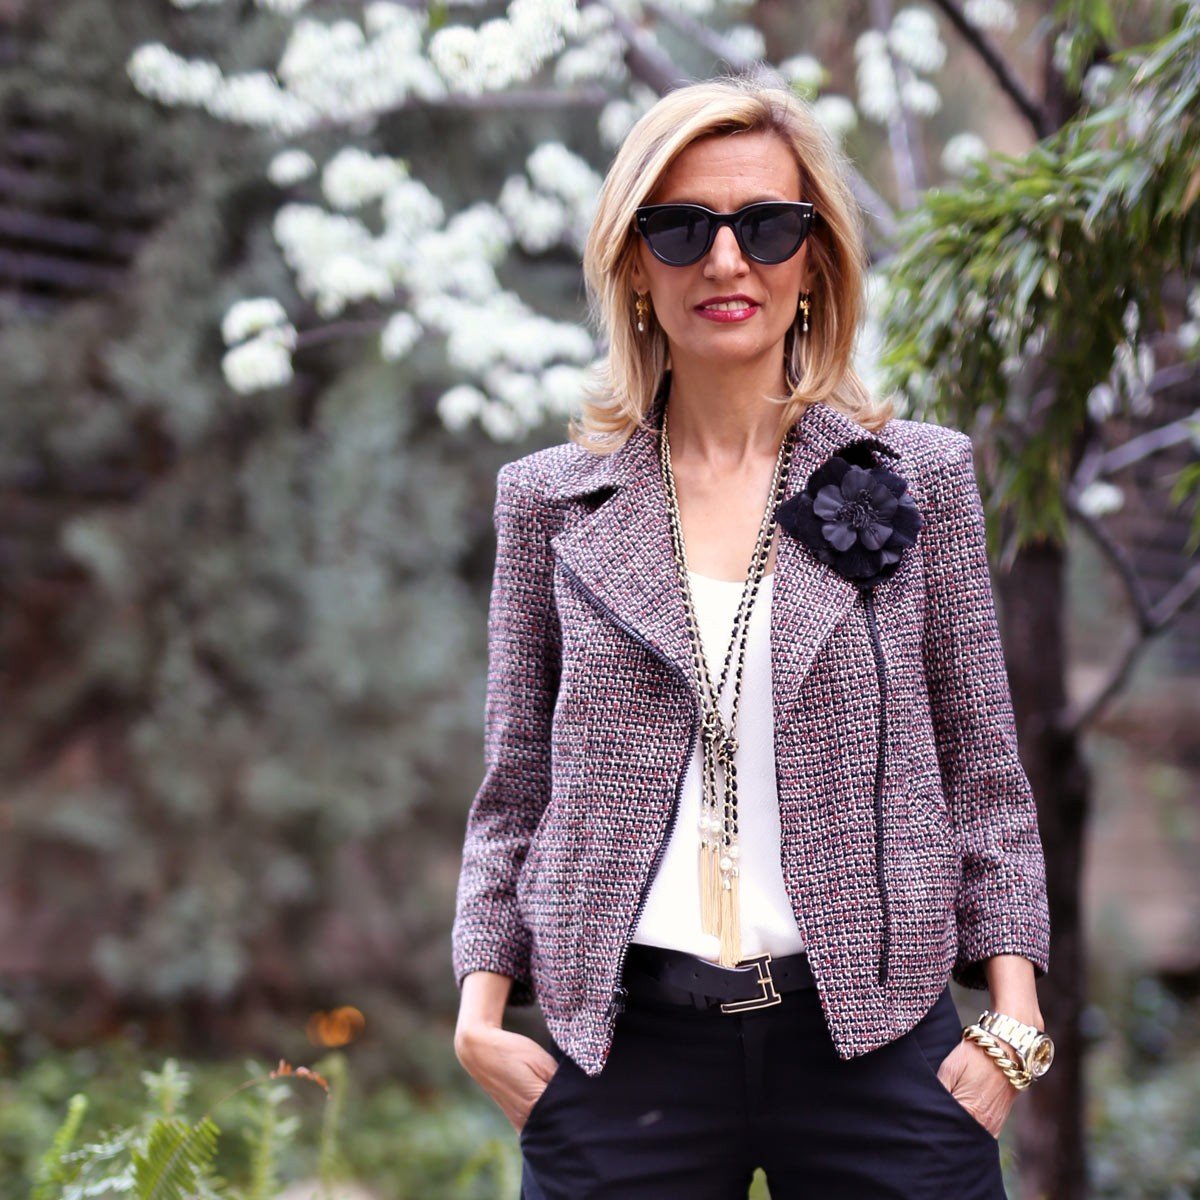 The Chanel inspired jacket, over 40 style